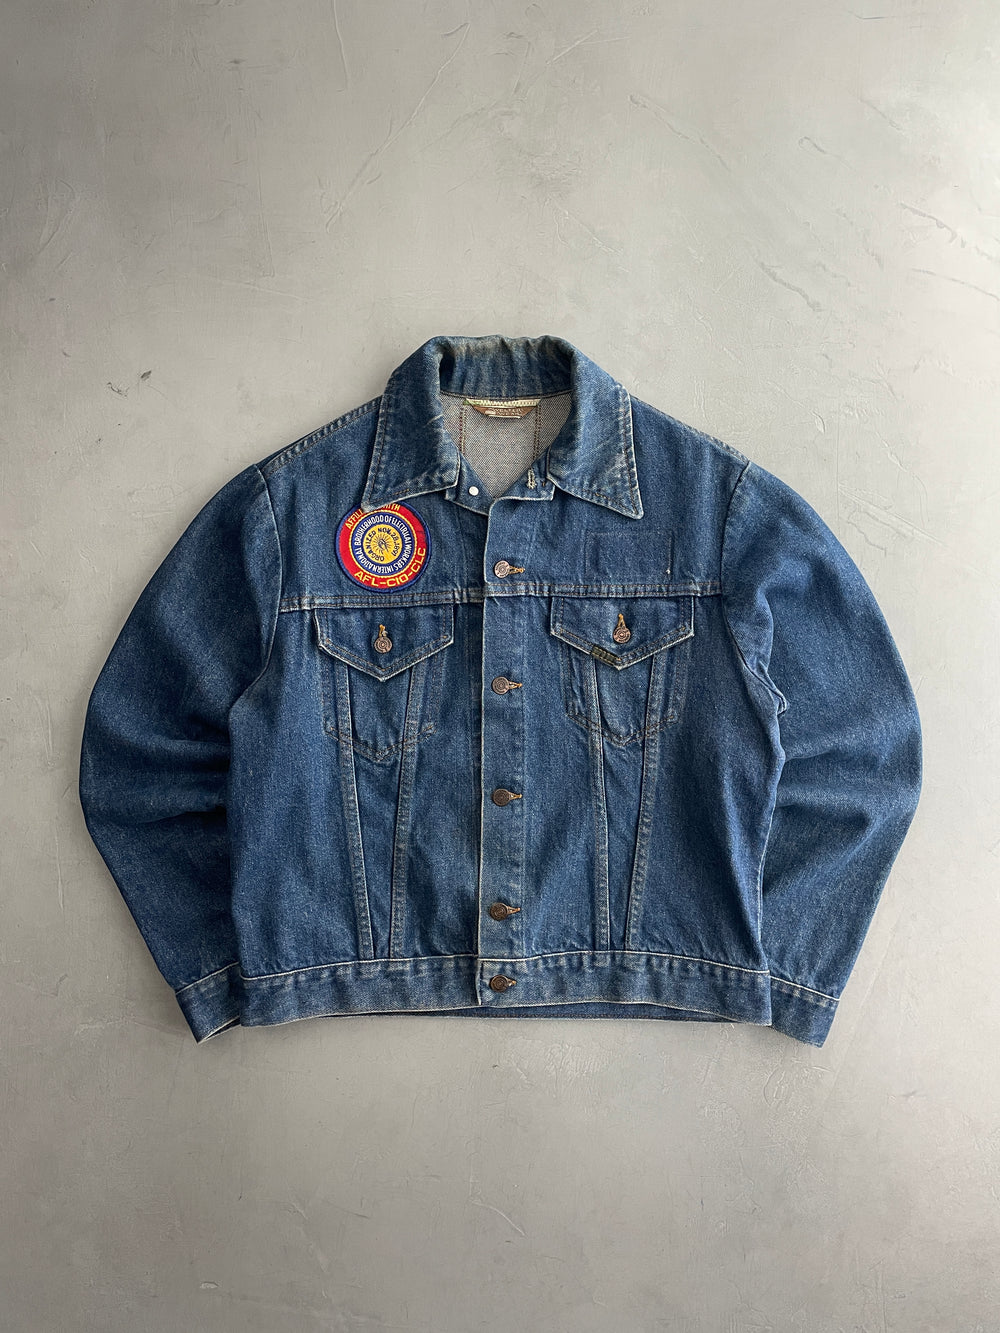 70's Patched Sears Westernwear Jacket [L]